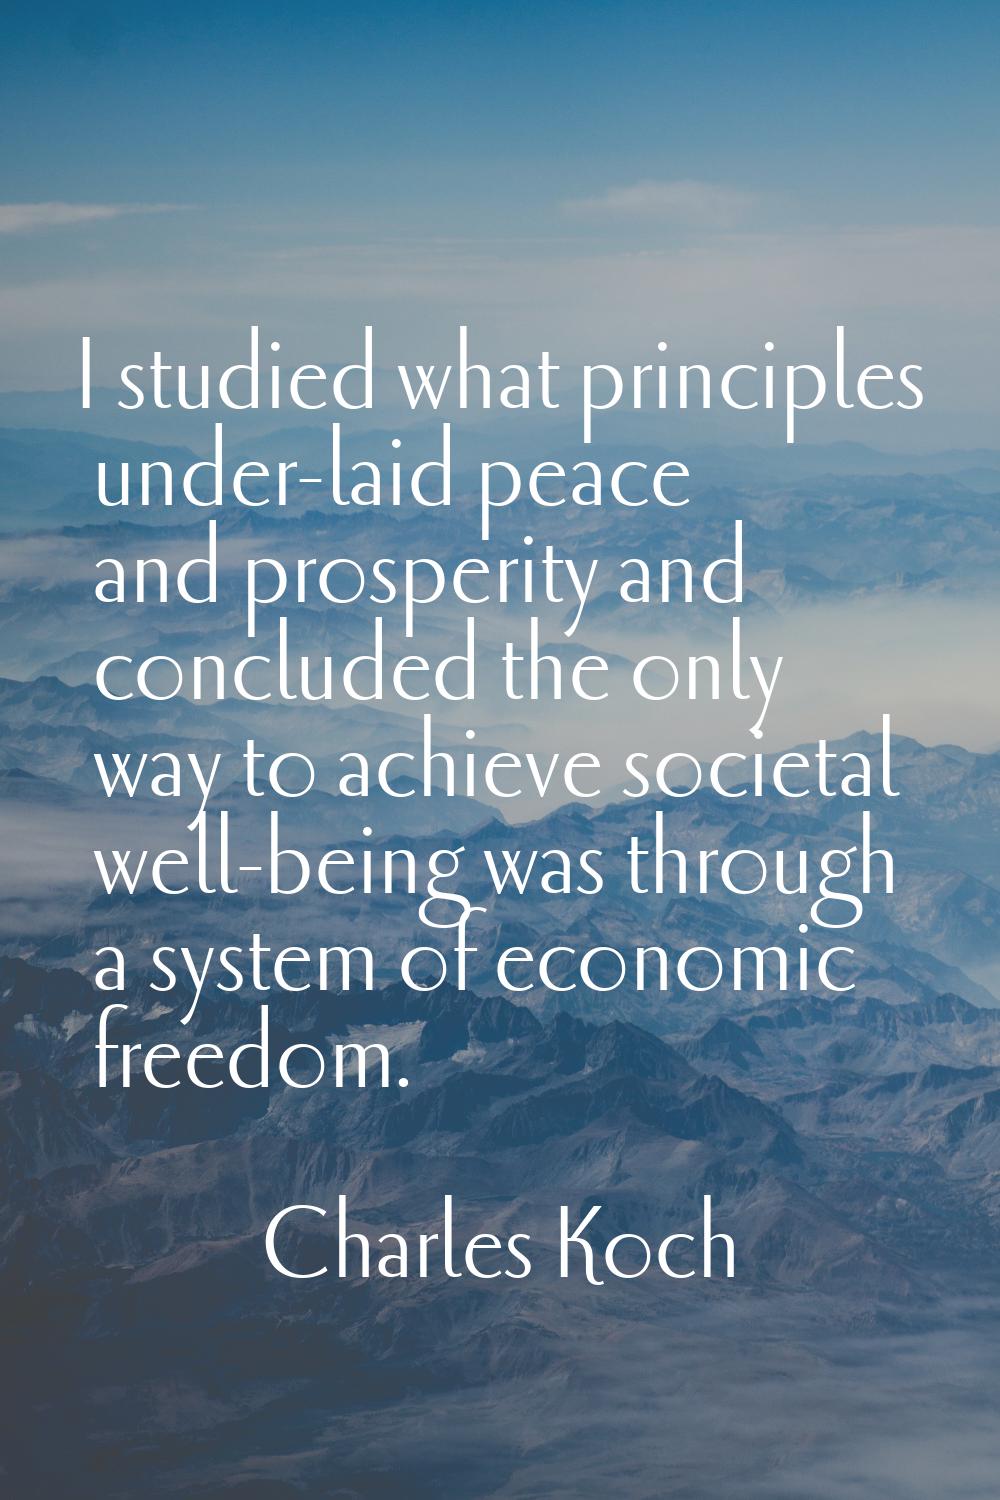 I studied what principles under-laid peace and prosperity and concluded the only way to achieve soc